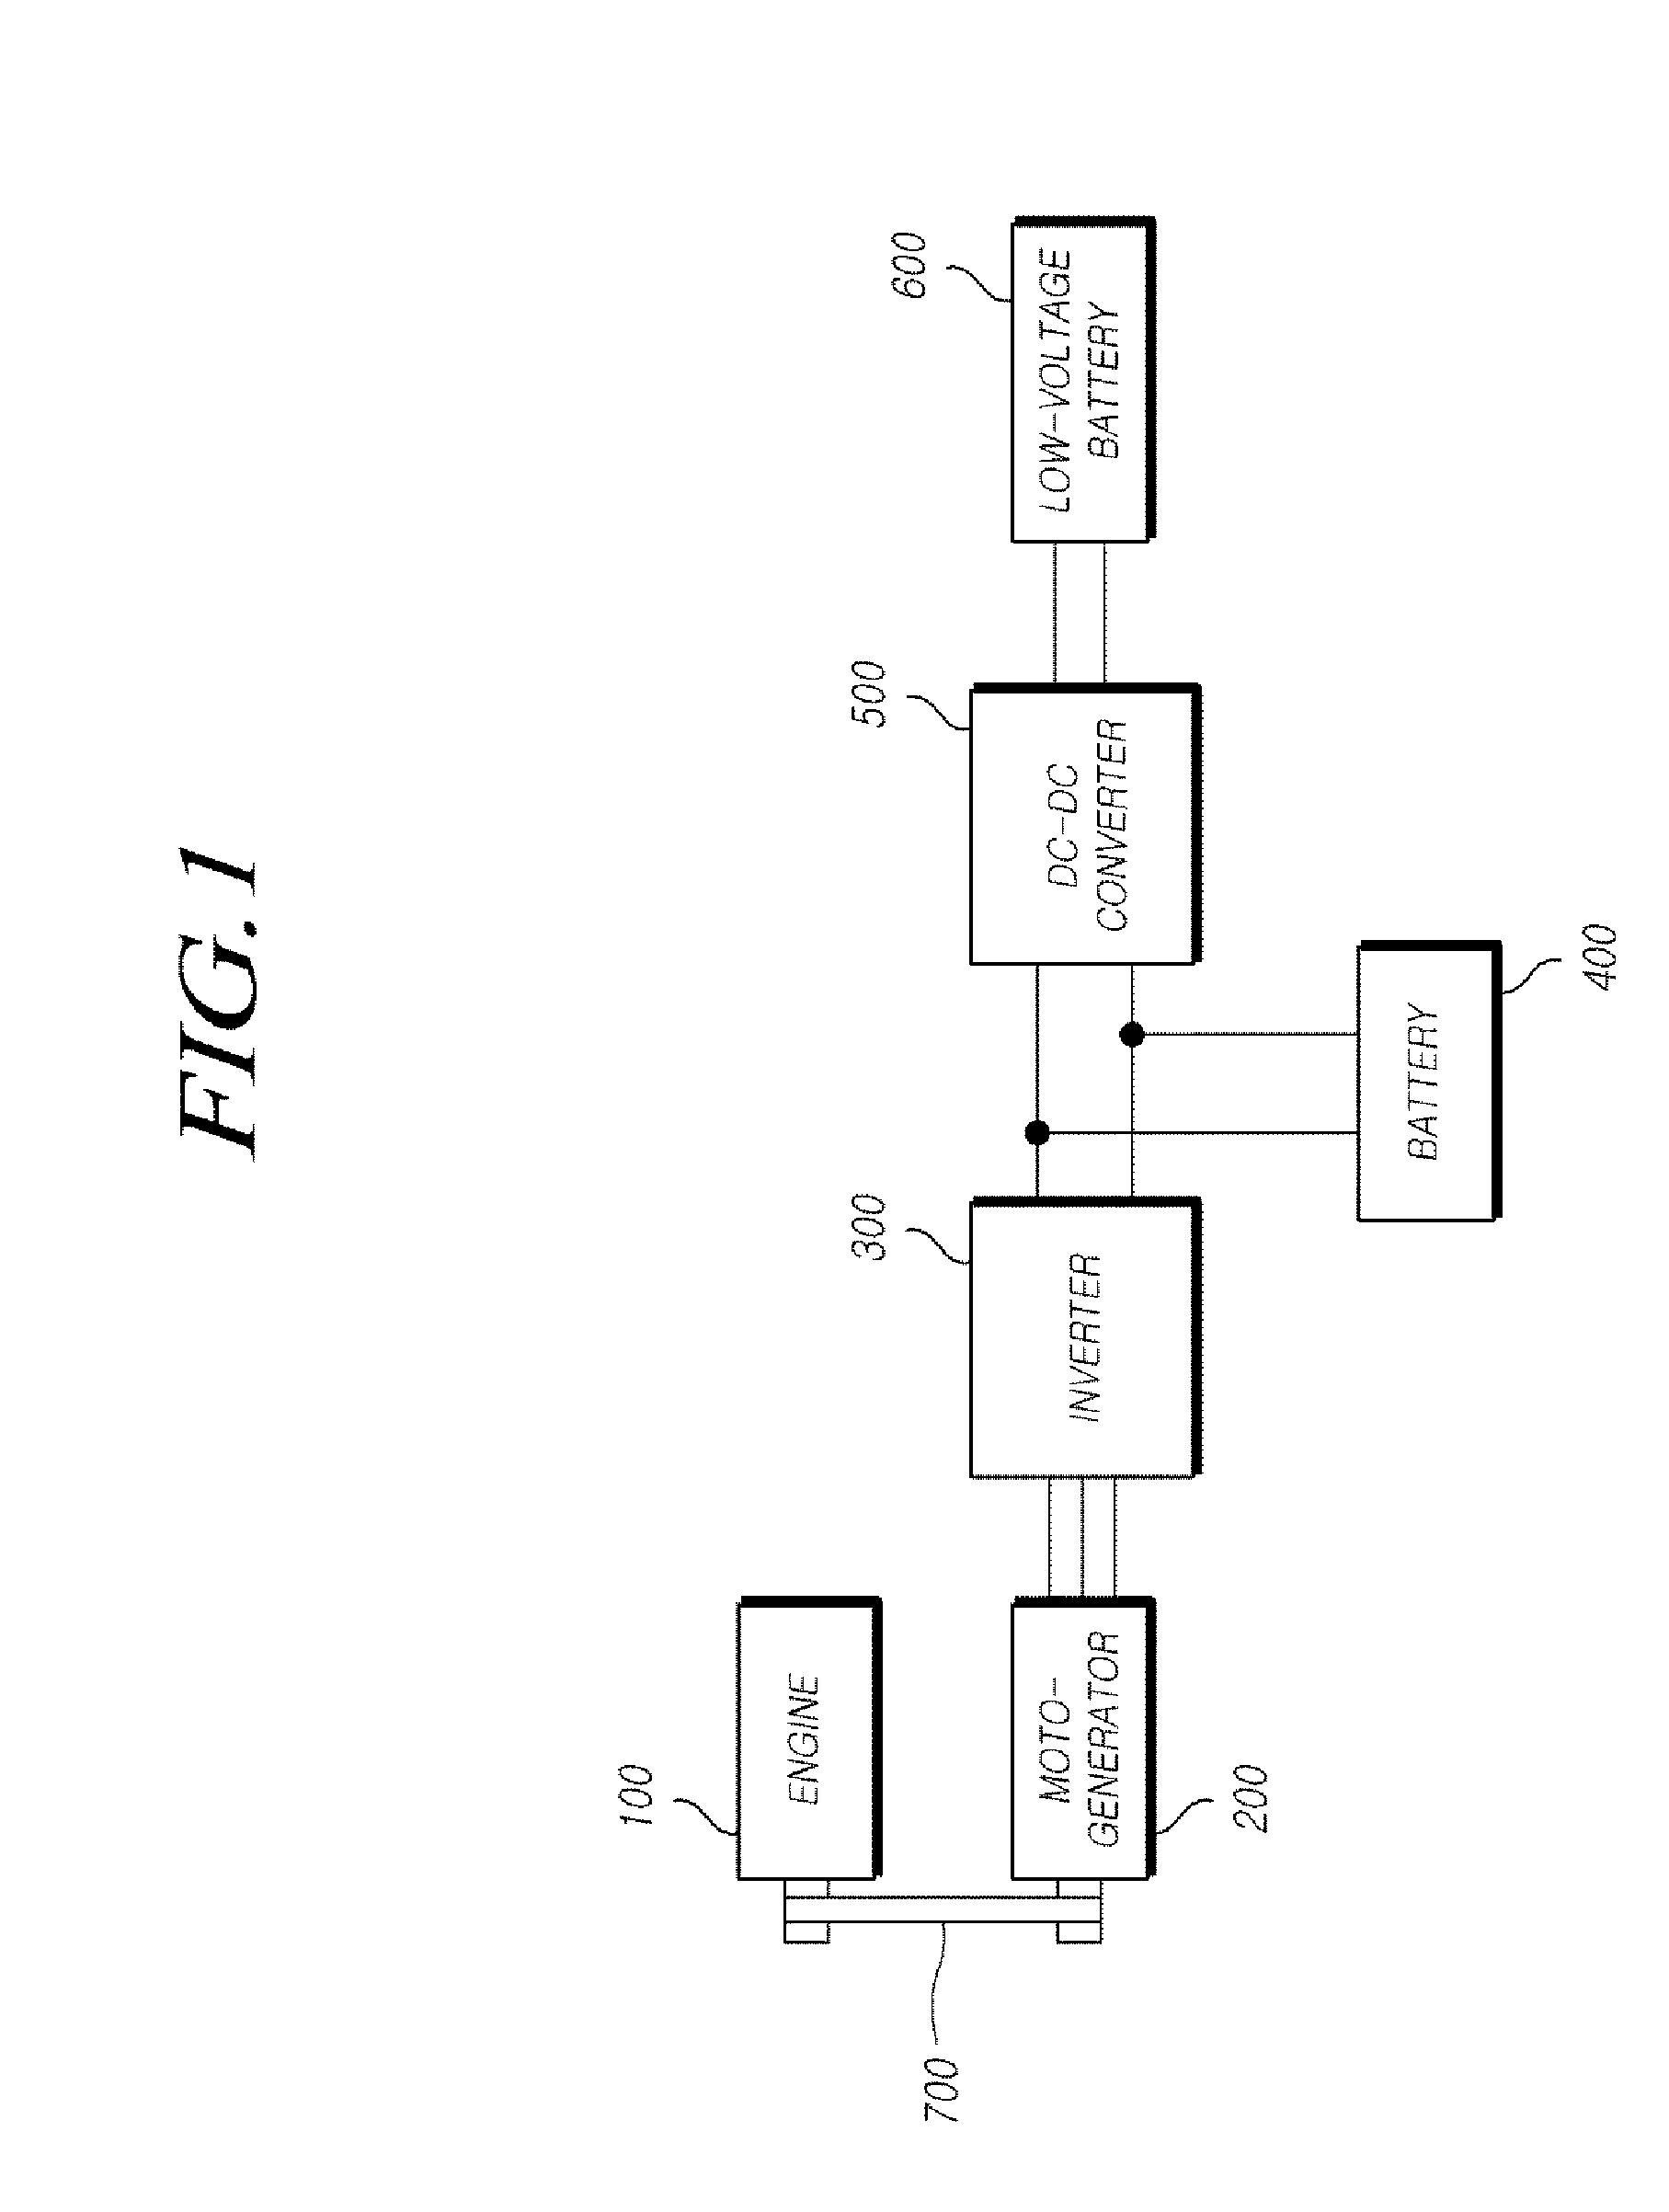 Method for controlling battery of mild hybrid vehicle